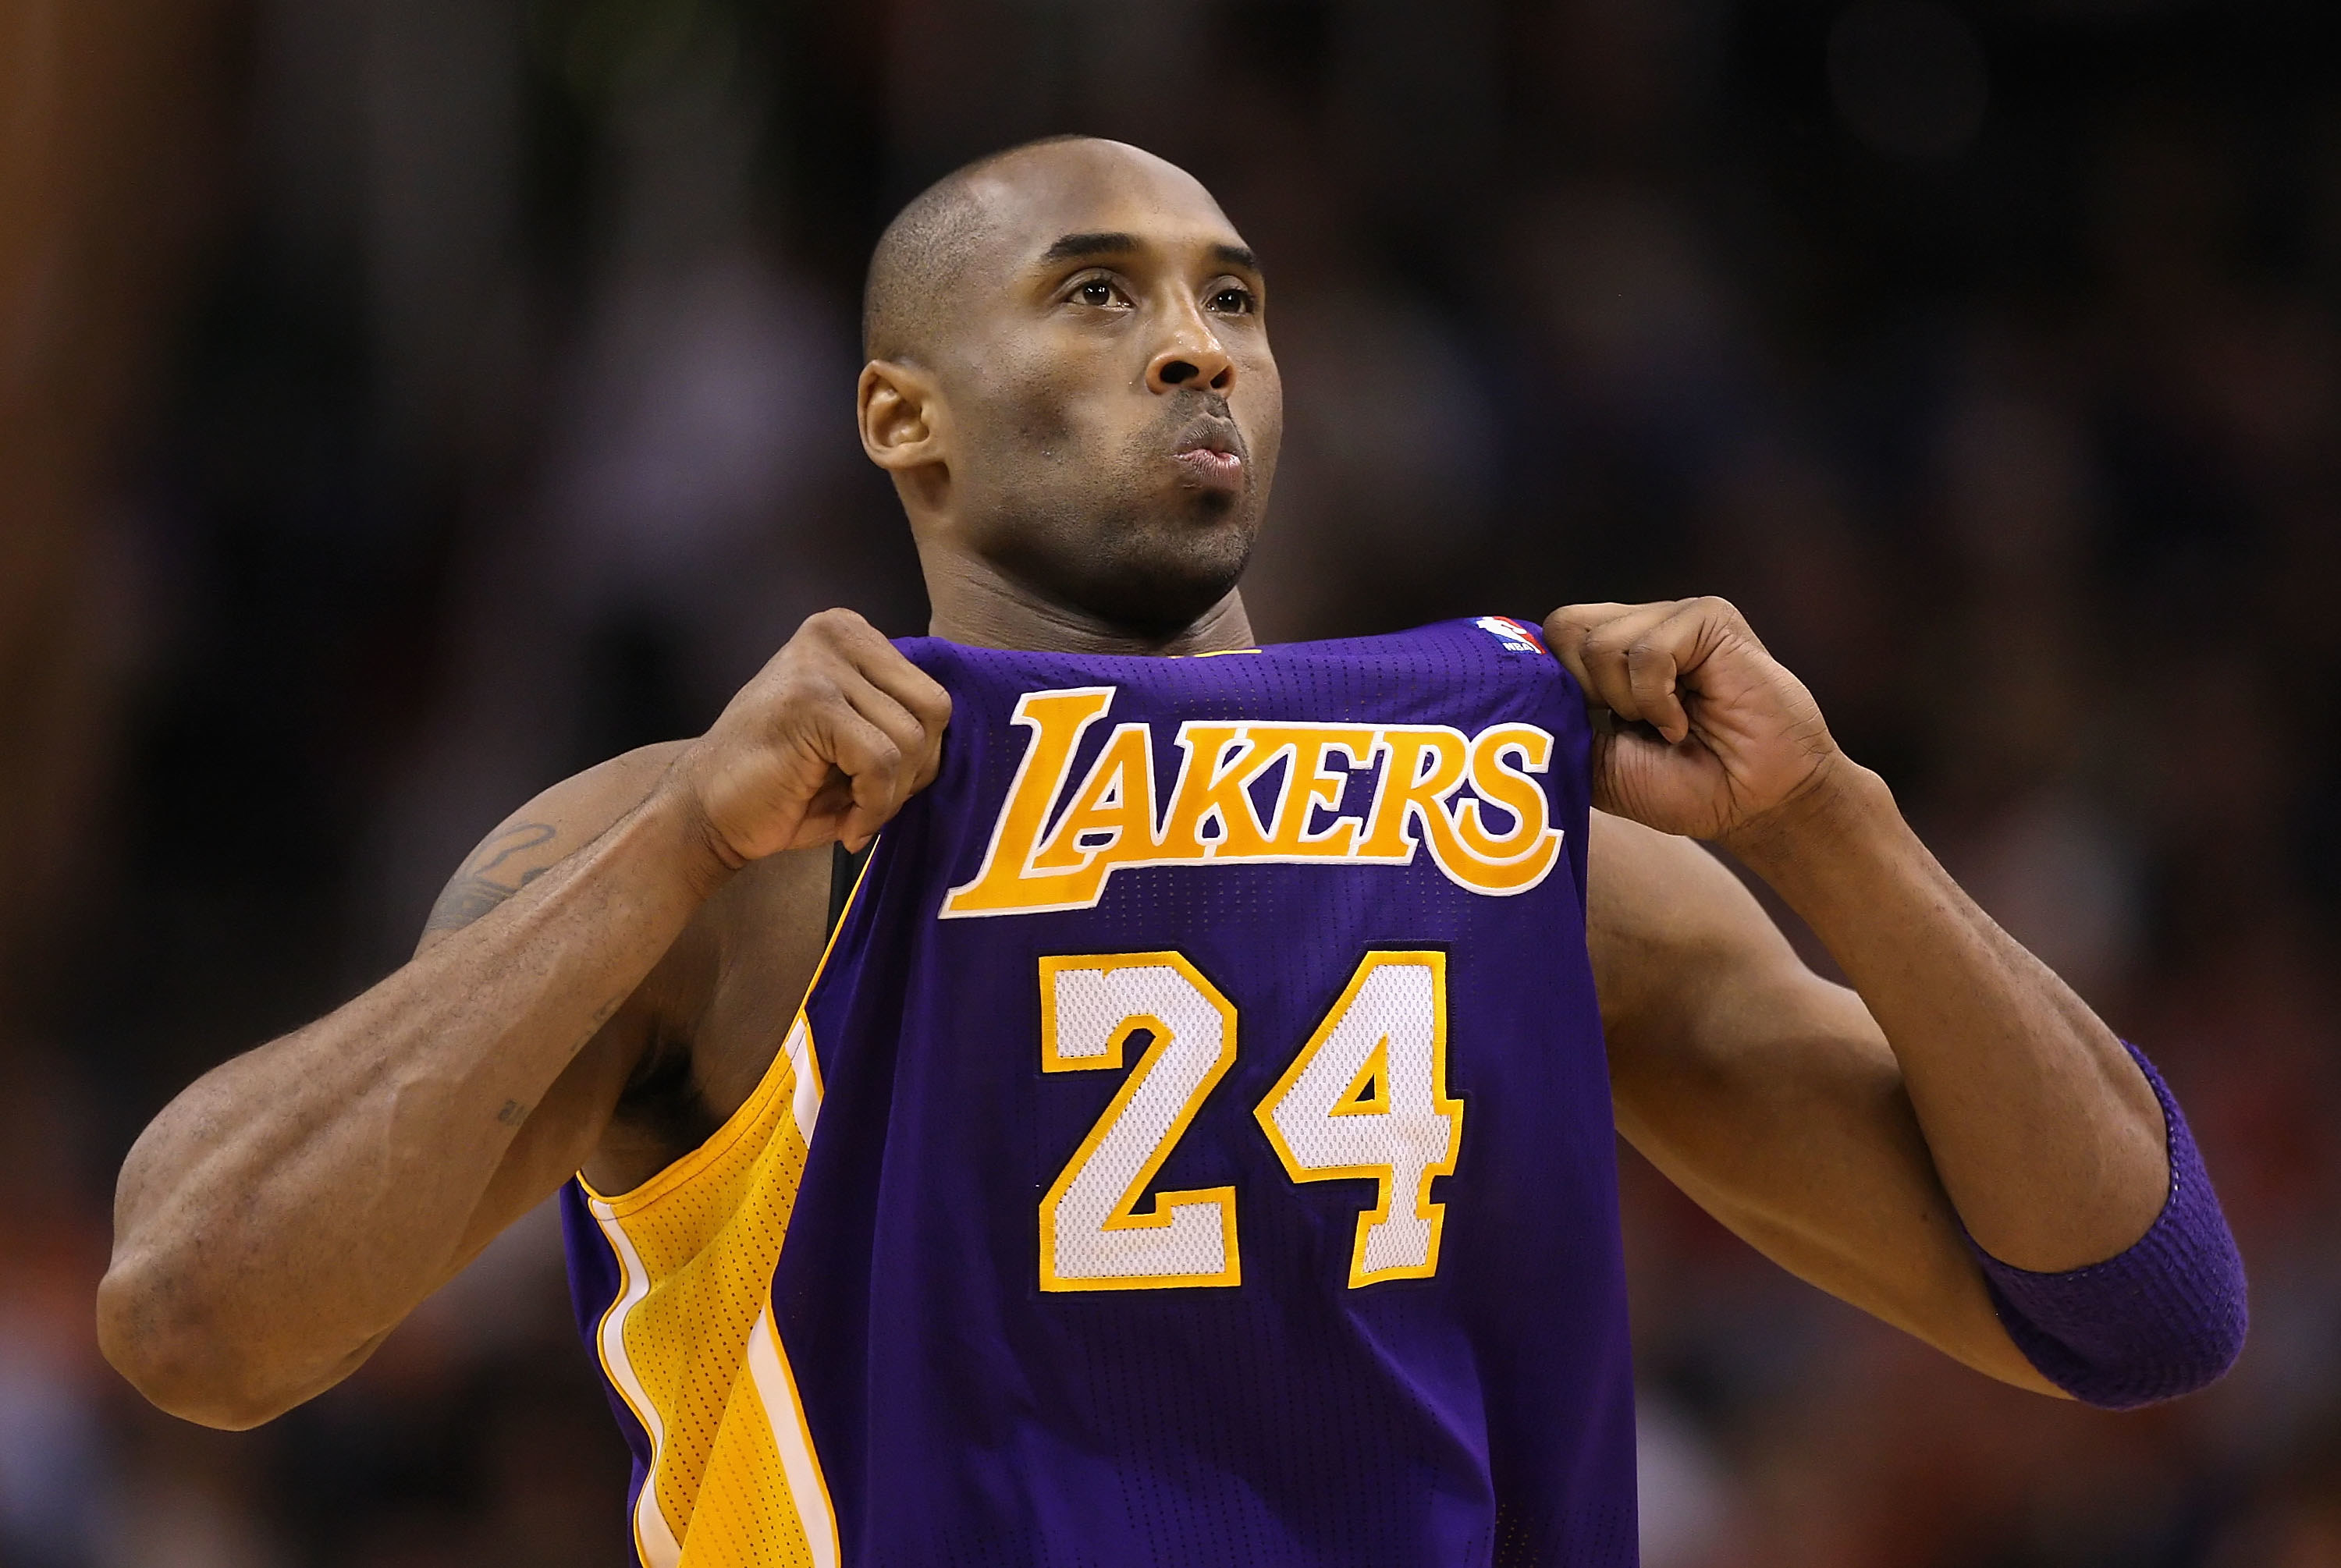 Purple Lakers jersey with yellow lettering and white numbers